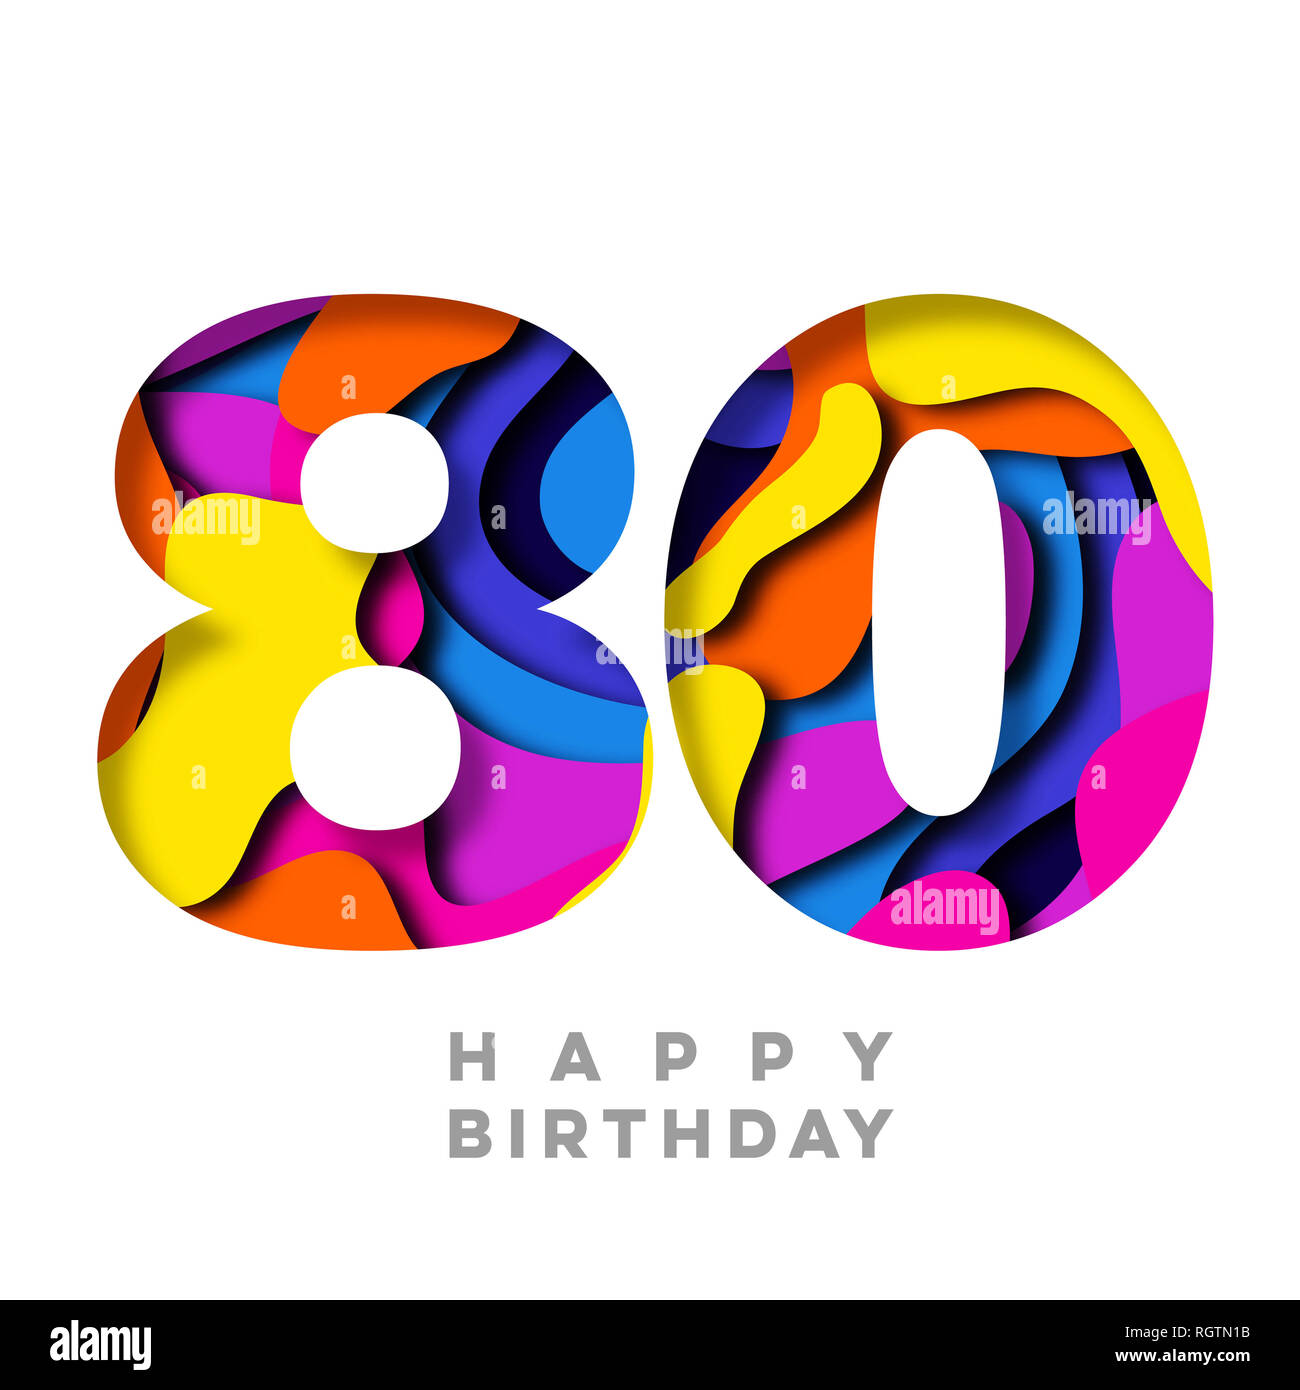 Number 80 Happy Birthday Colorful Paper Cut Out Design Stock Photo